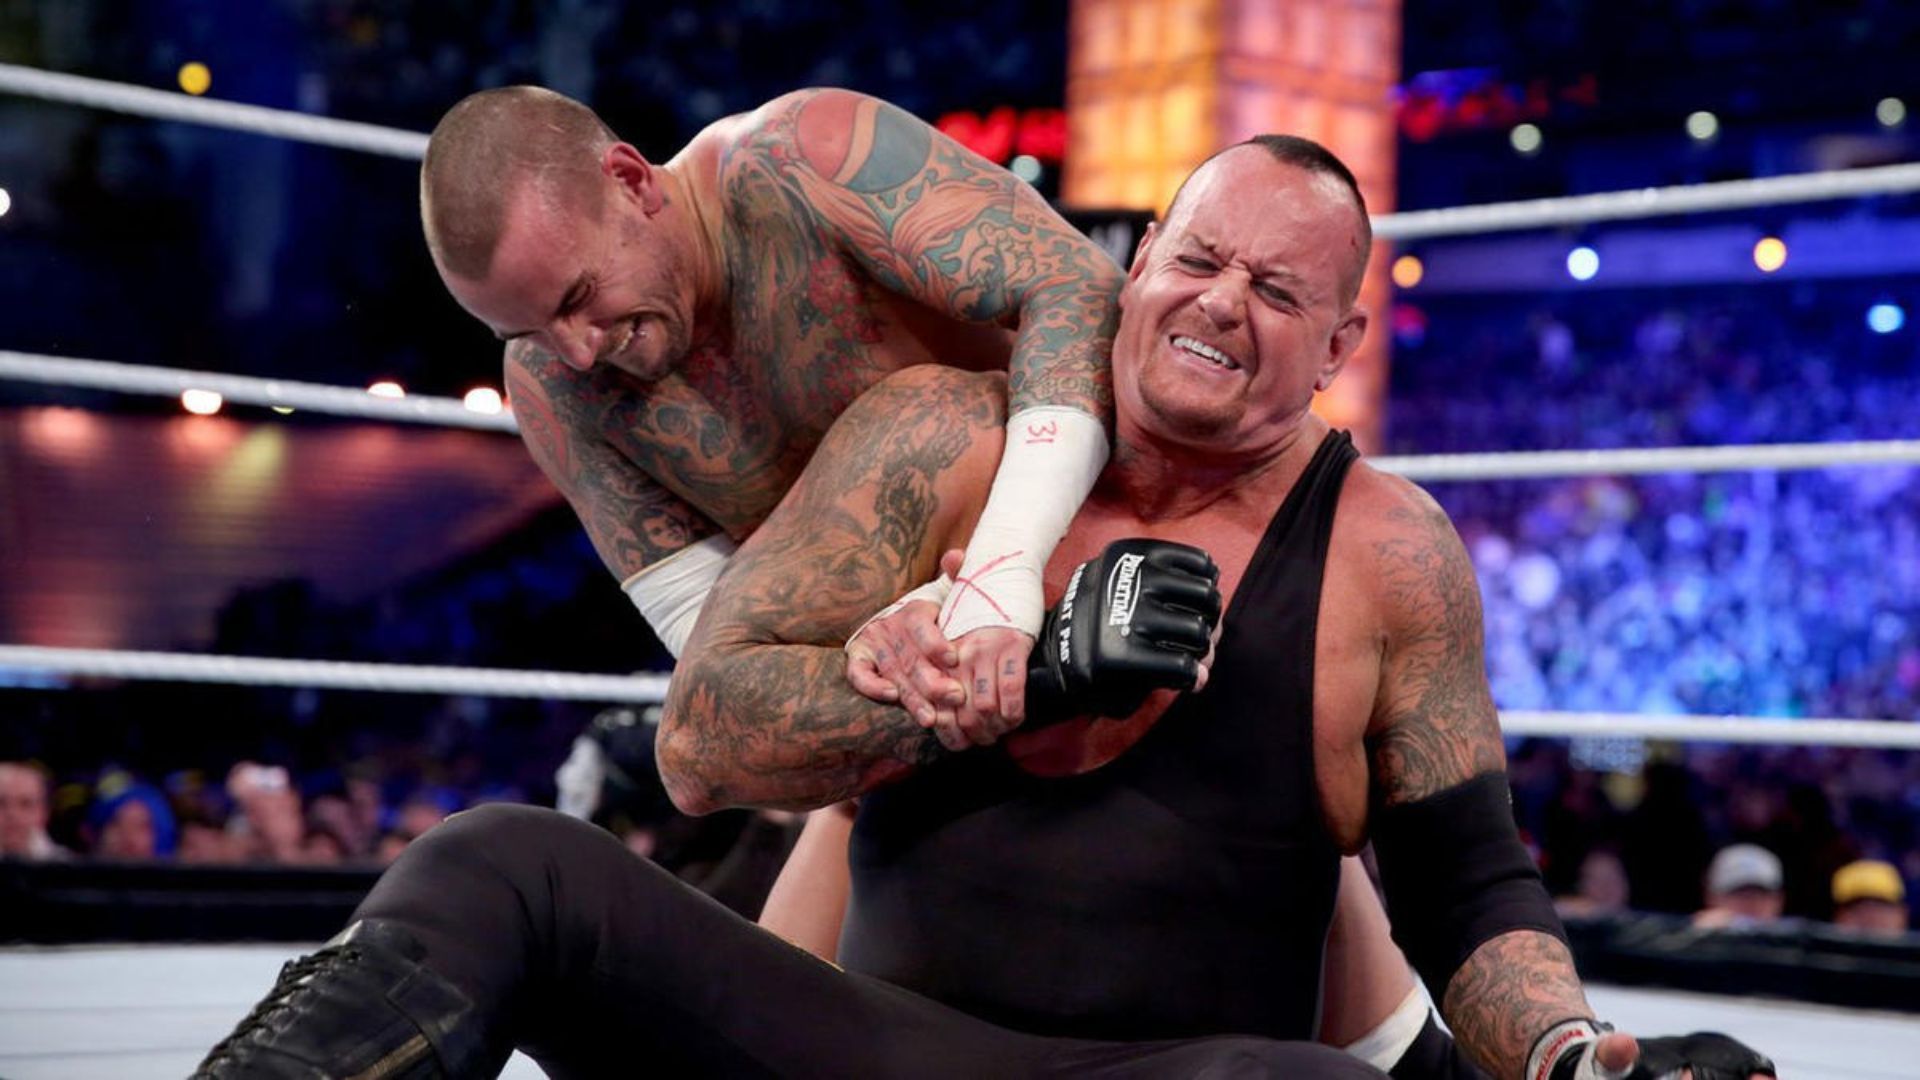 CM Punk and Undertaker during their match. Image Credits: X